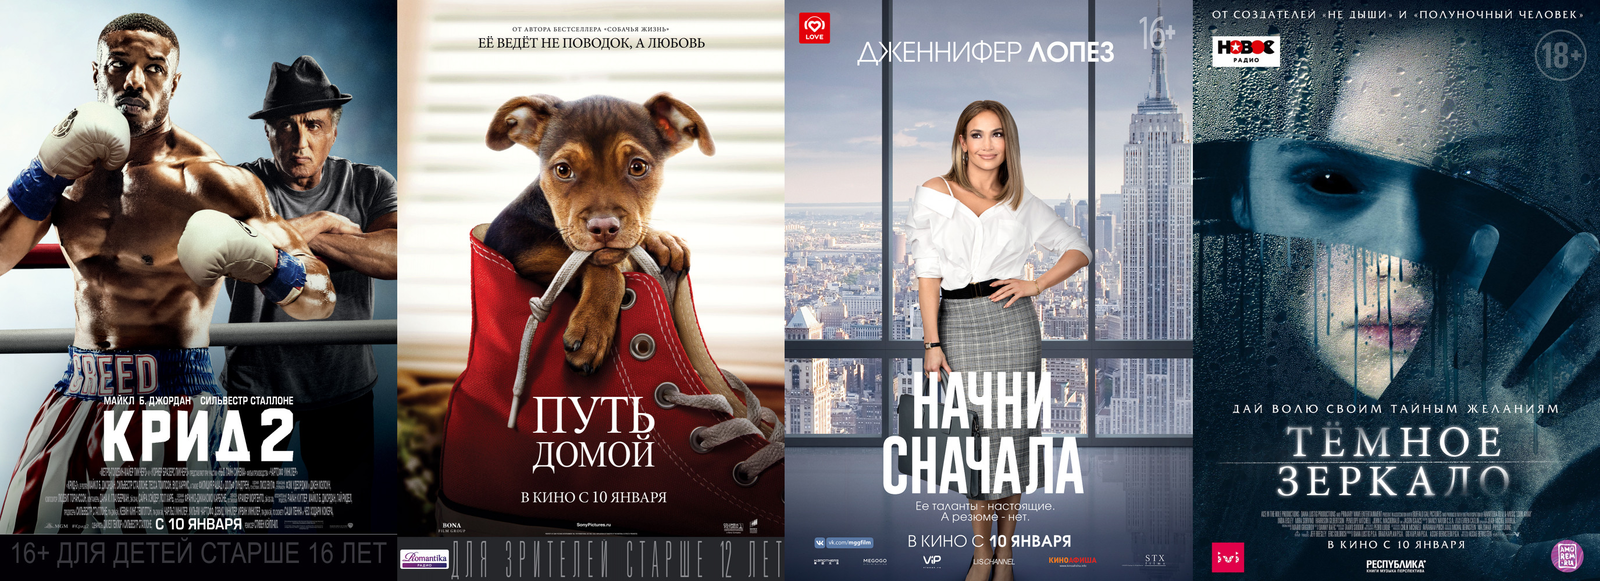 Russian box office receipts and distribution of screenings over the past weekend (January 10 - 13) - Movies, Box office fees, , Way home, , Dark Mirror